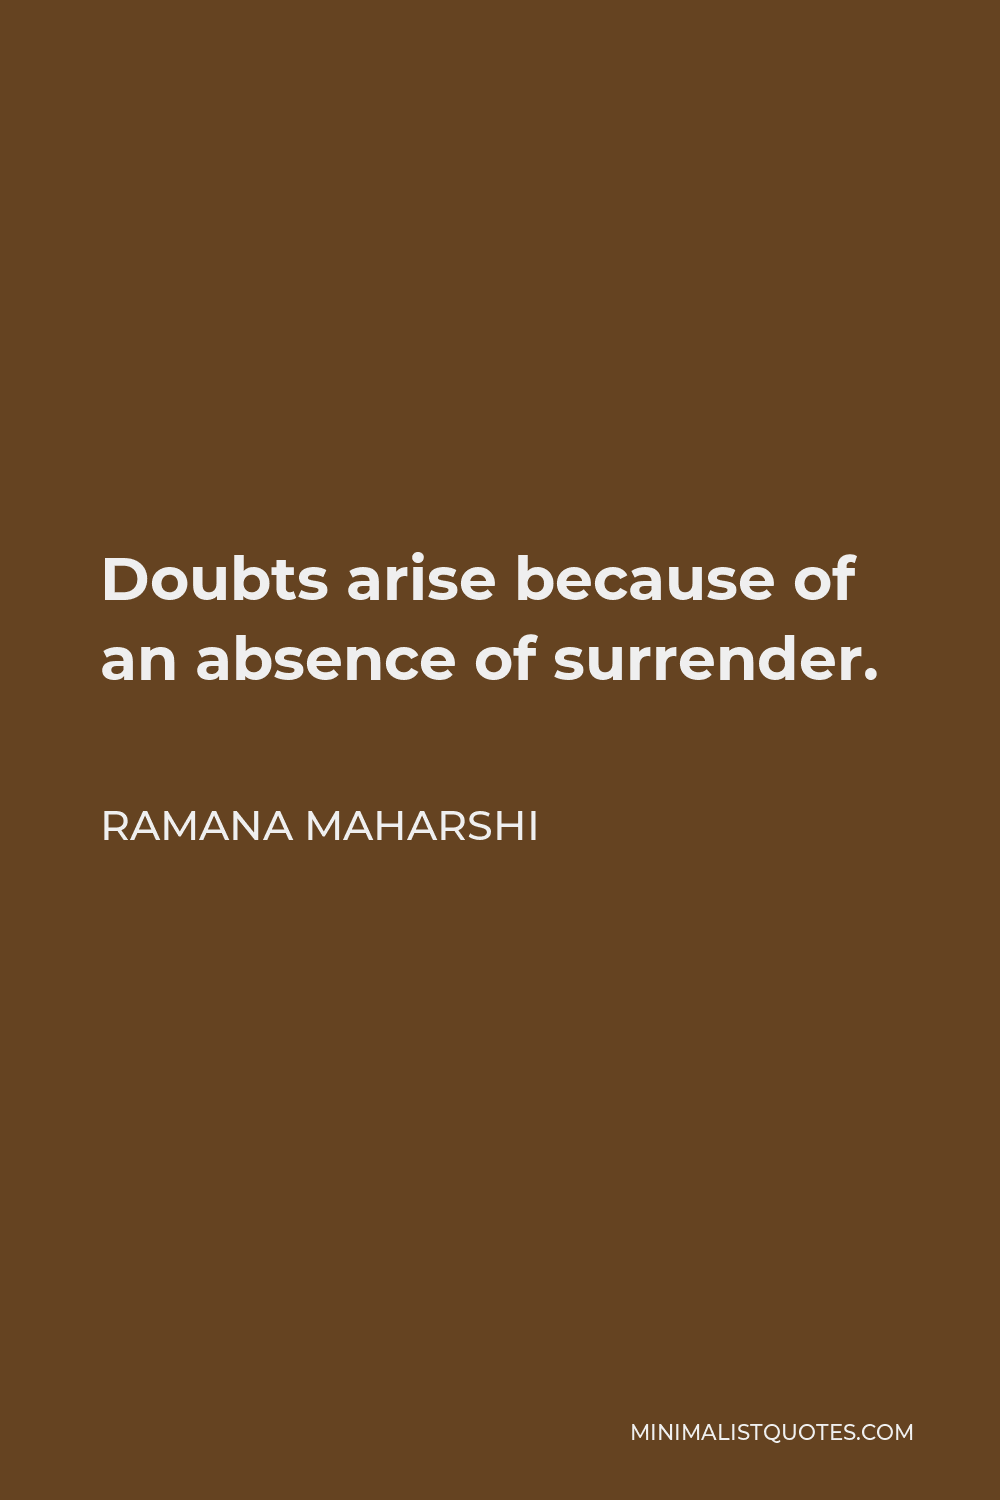 Ramana Maharshi Quote - Doubts arise because of an absence of surrender.